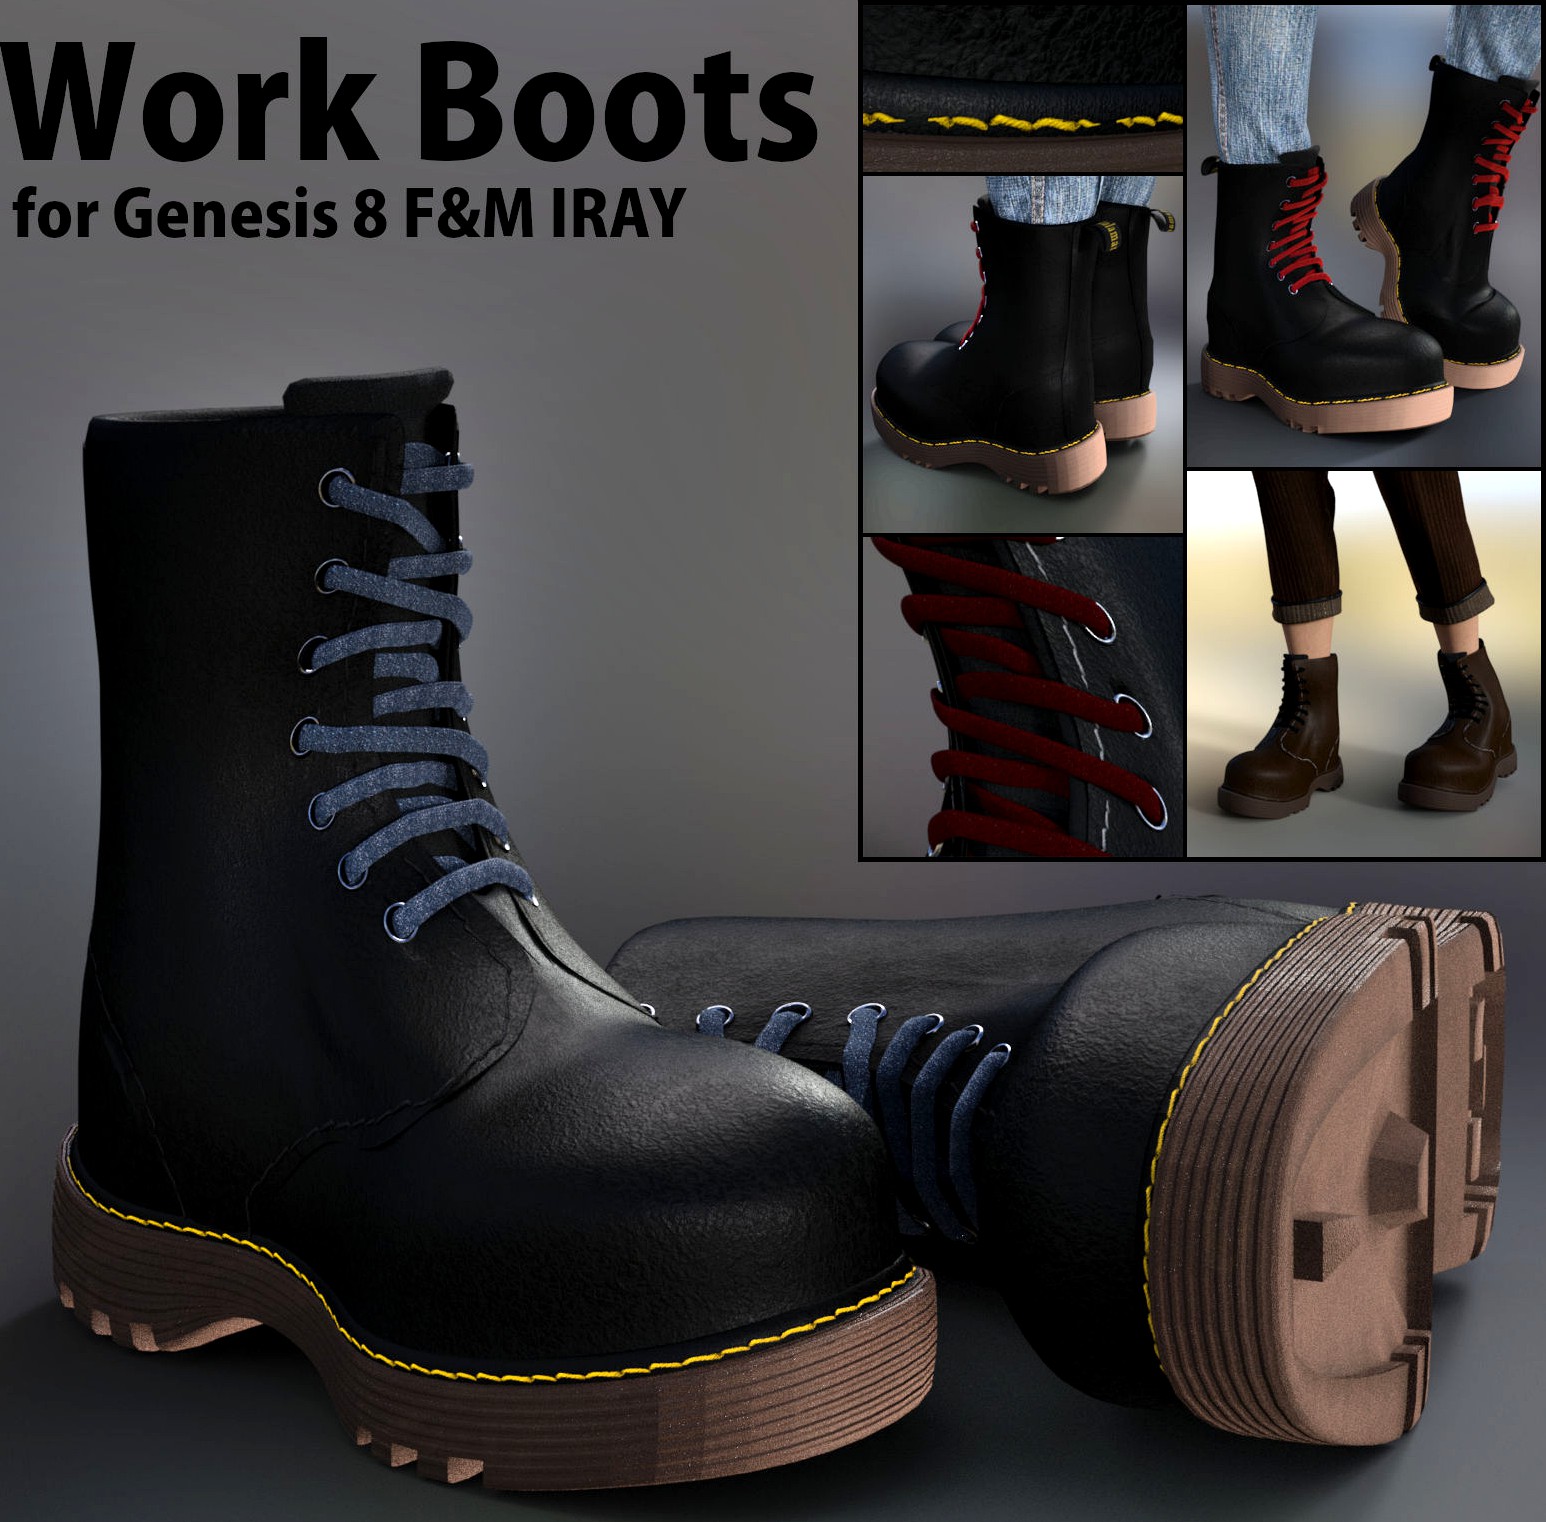 Work Boots for G8F and G8M Iray